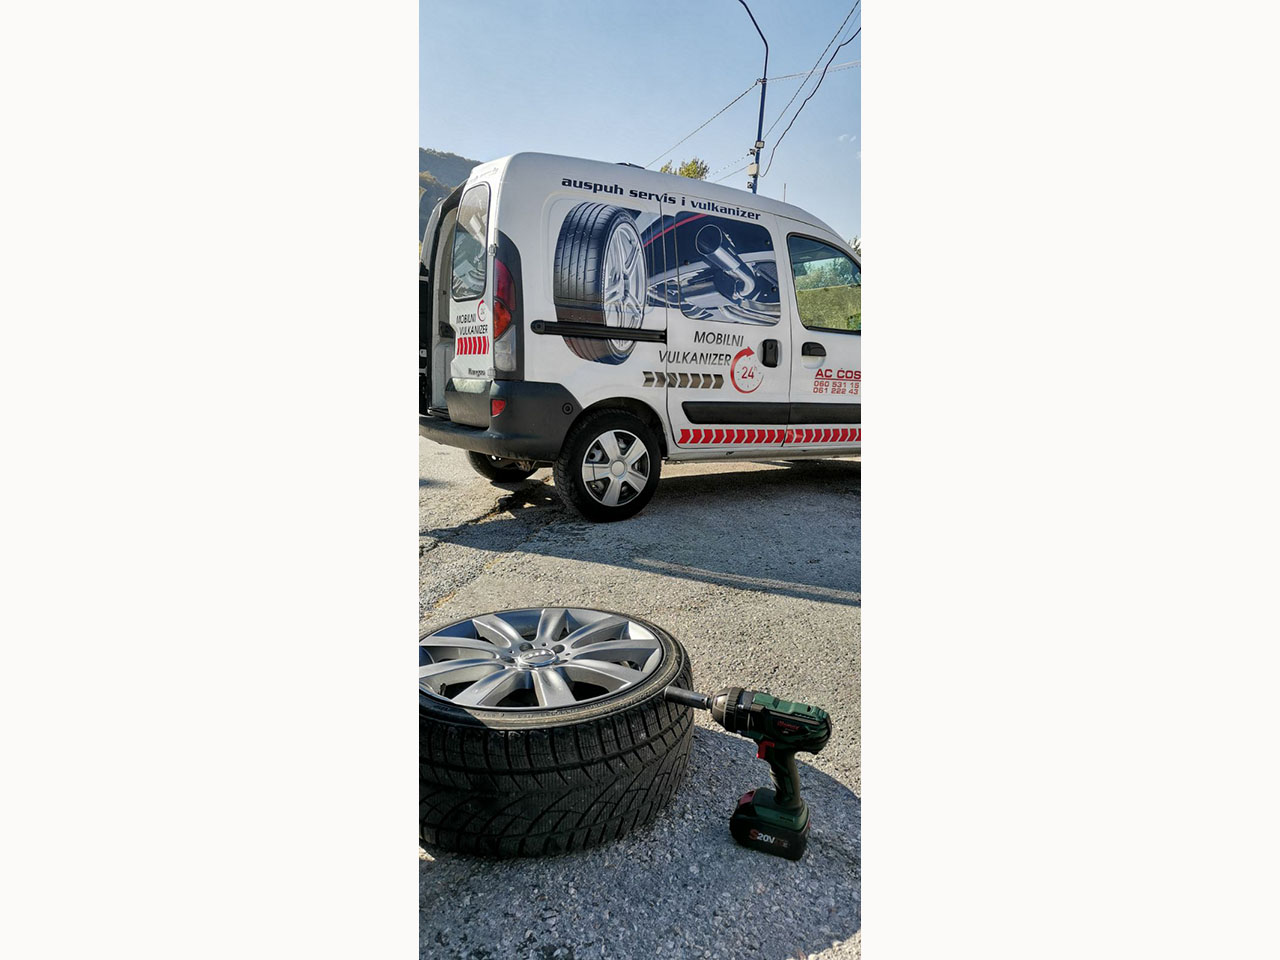 Photo 2 - EXHAUST SYSTEM SERVICE AND TIRE SERVICE COSIC - Auto services, Uzice